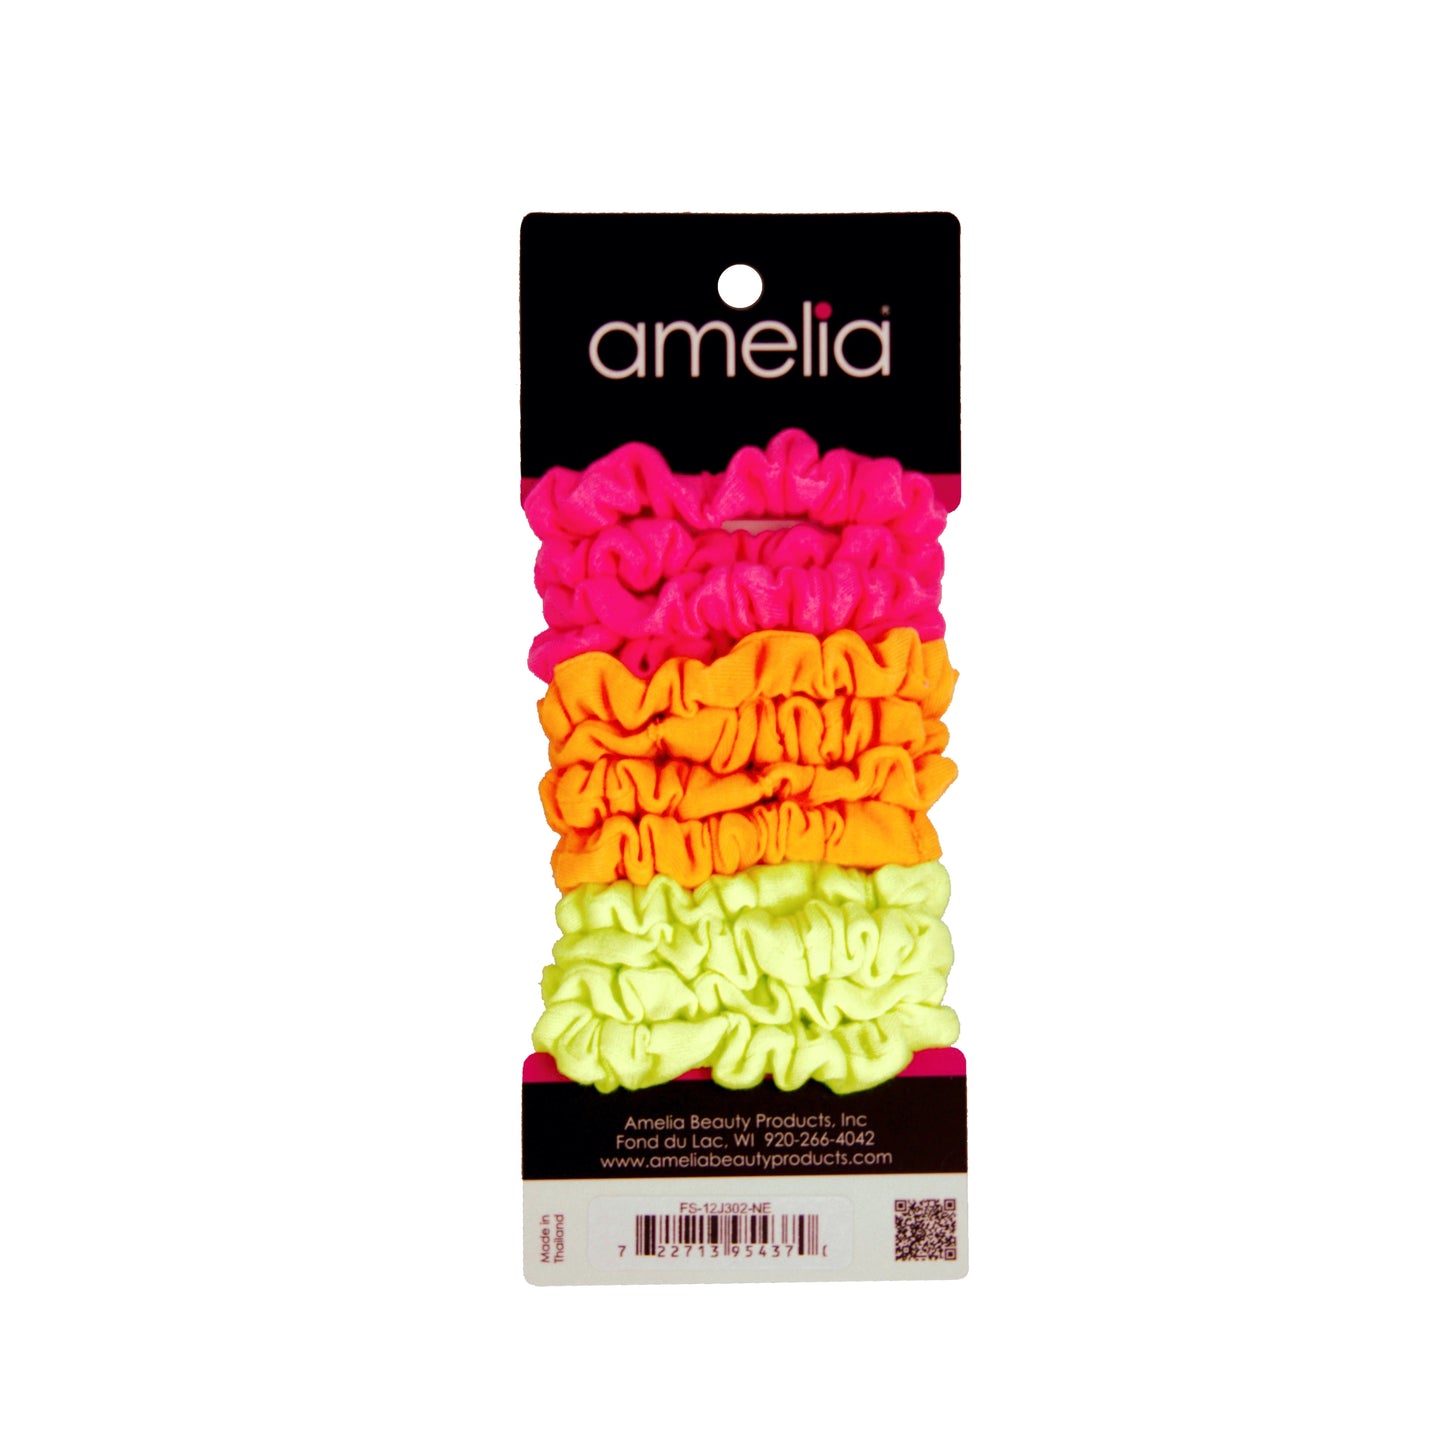 Amelia Beauty, Neon Mix Jersey Scrunchies, 2.25in Diameter, Gentle on Hair, Strong Hold, No Snag, No Dents or Creases. 12 Pack